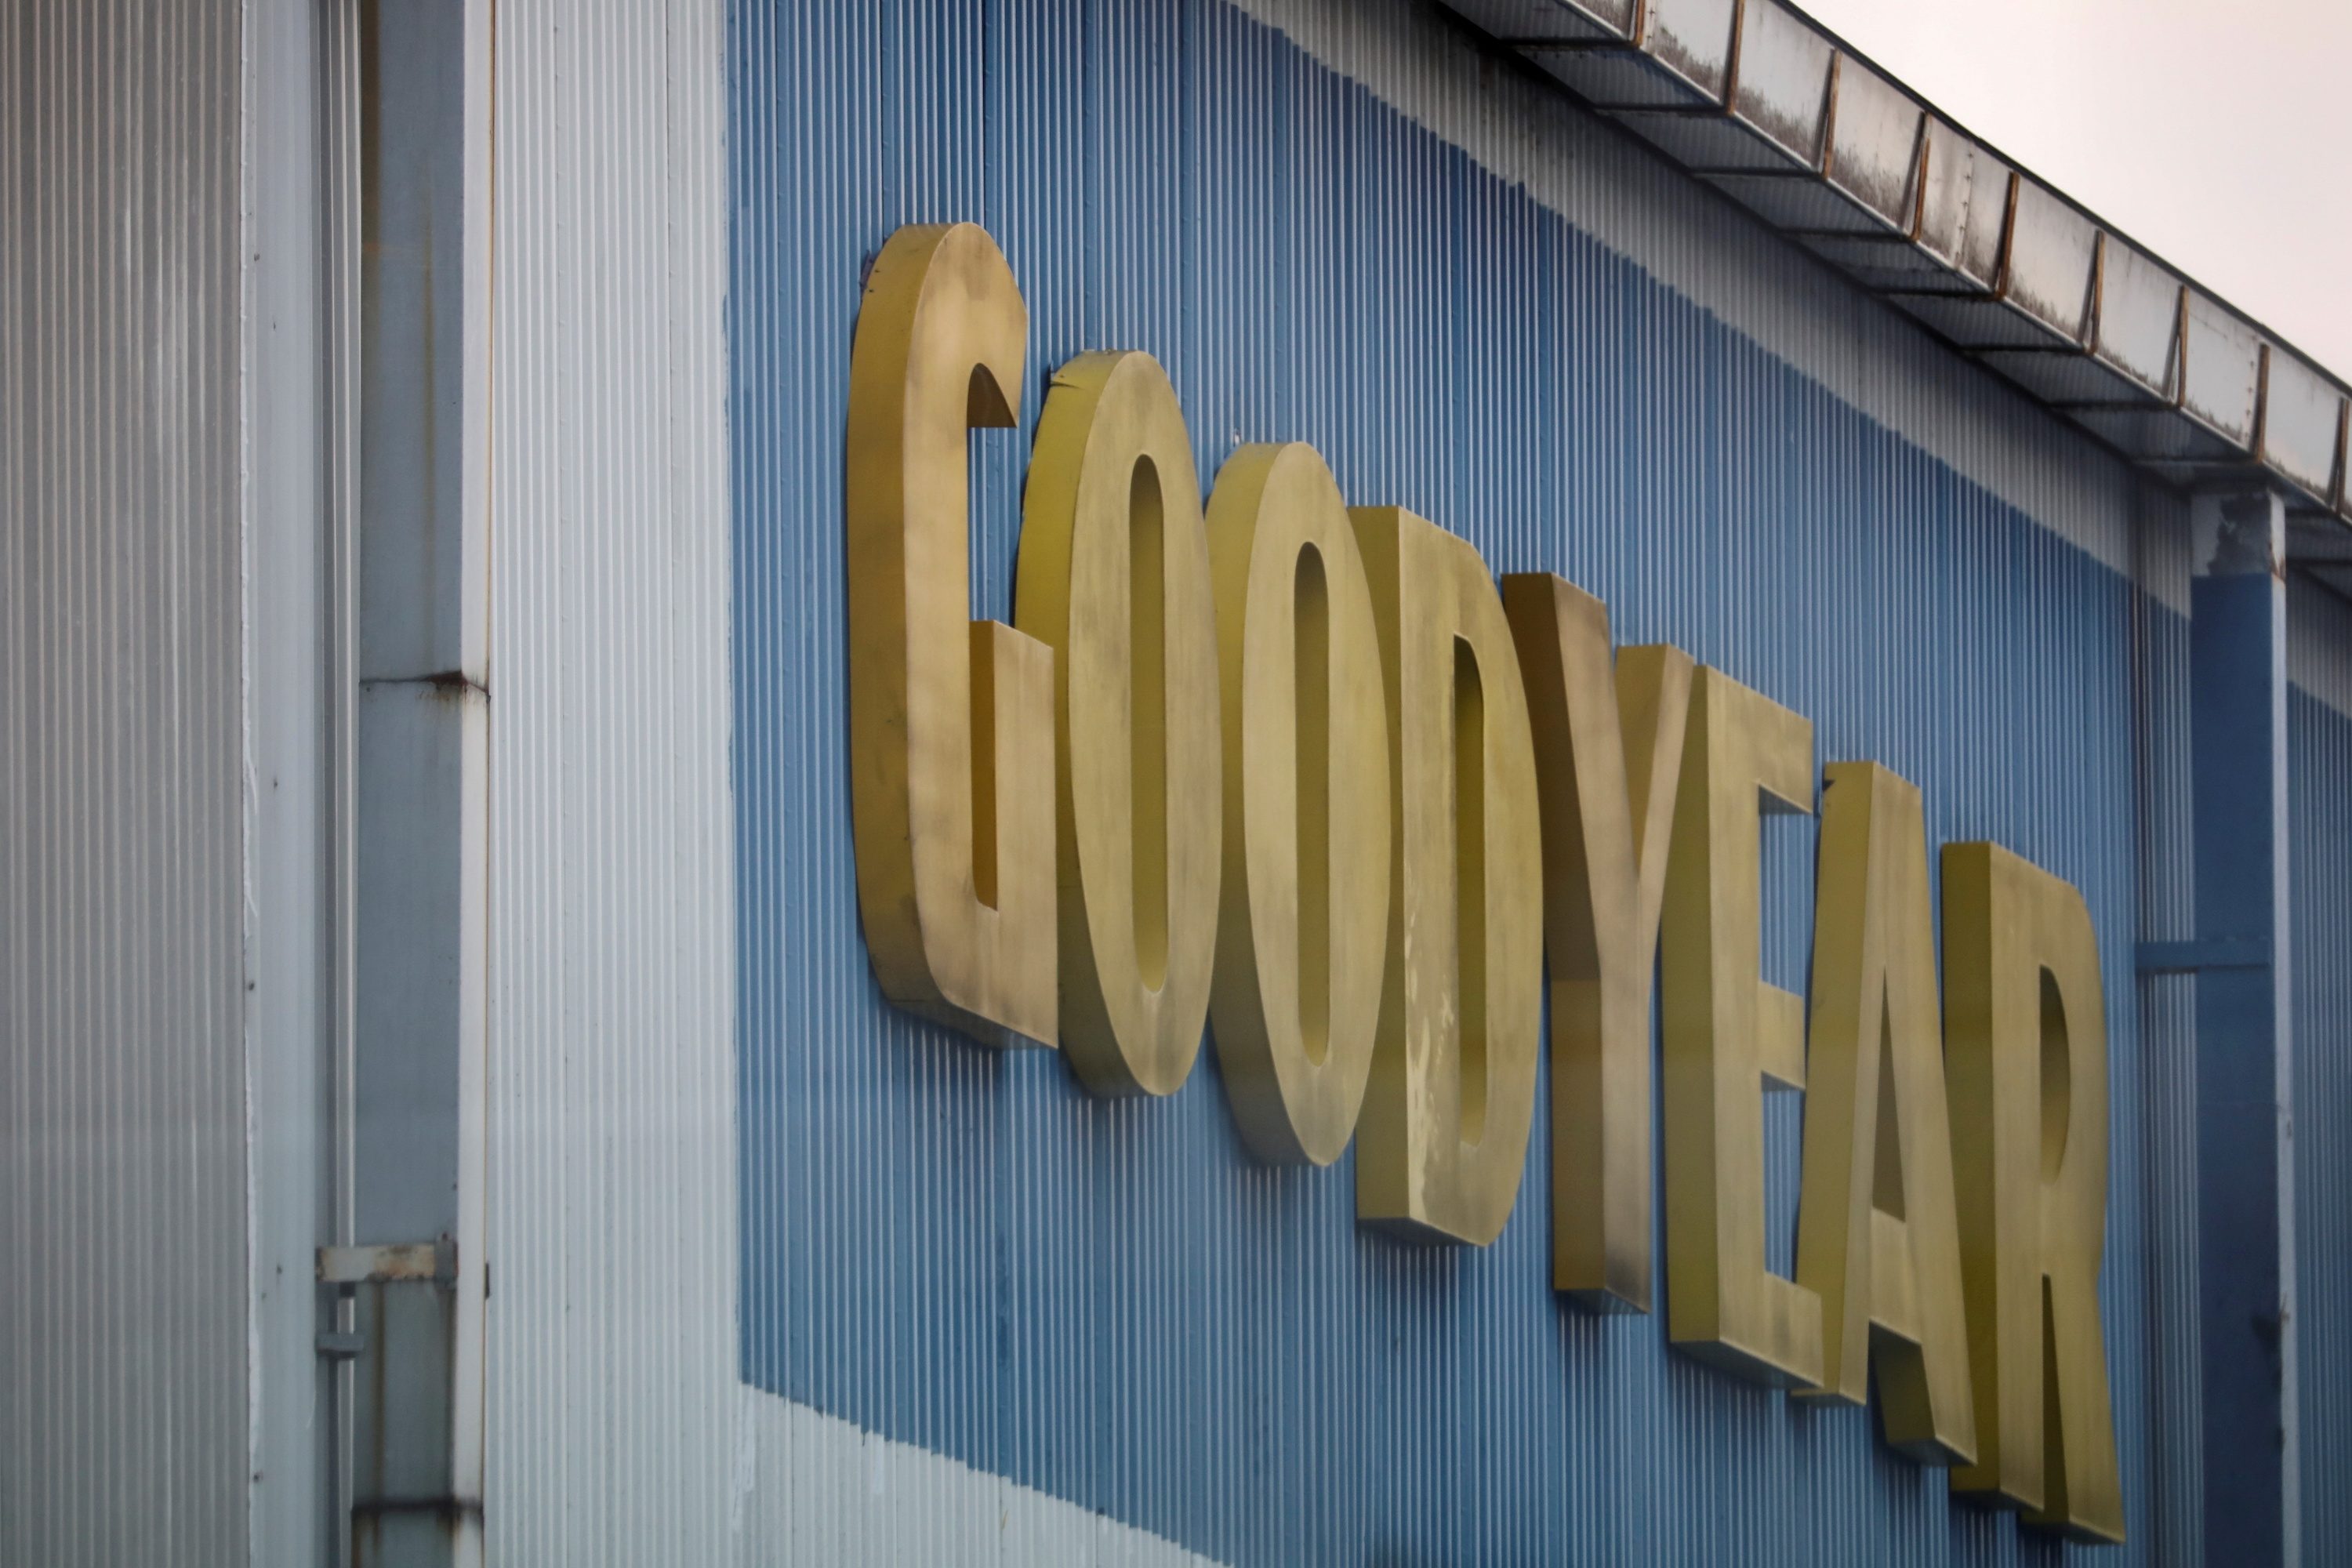 US investigators question Goodyear Malaysia workers over labor practices